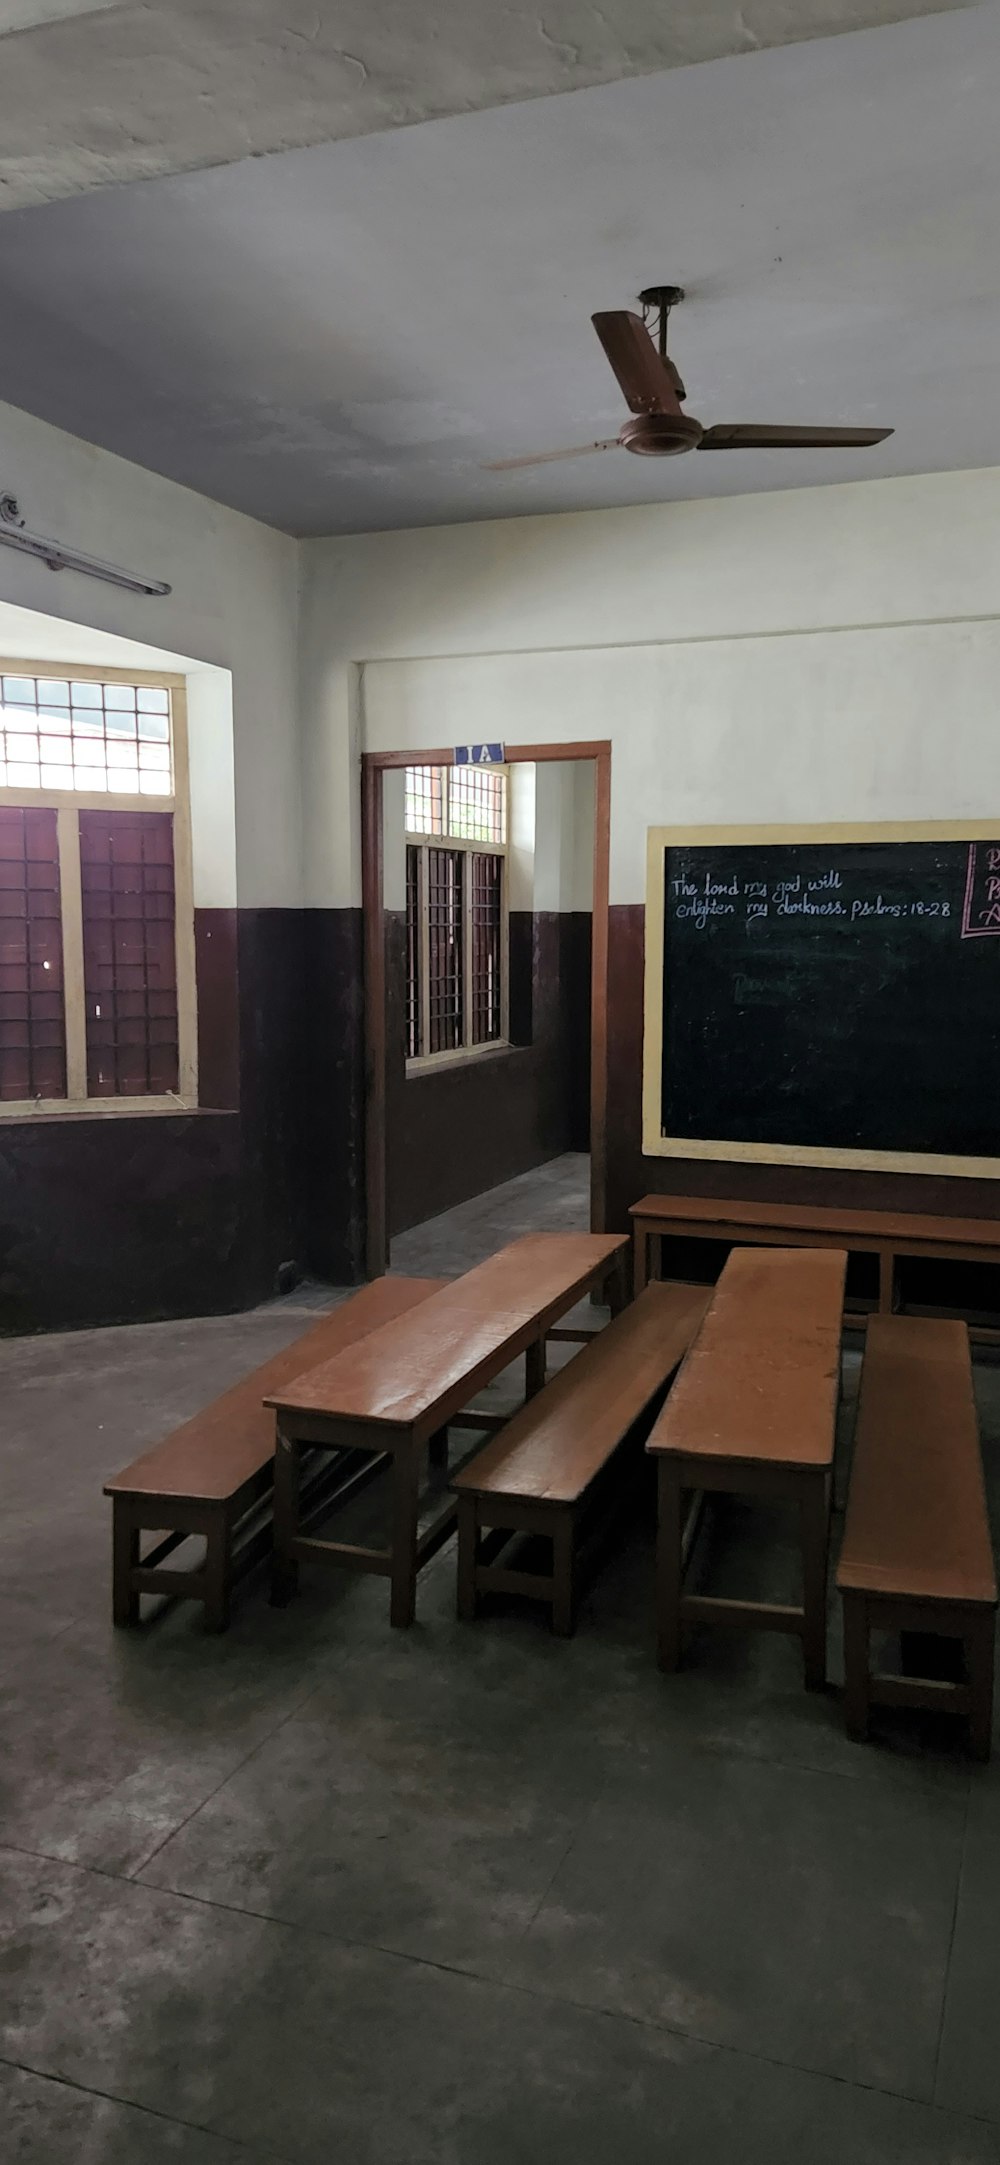 a classroom with a blackboard and wooden benches